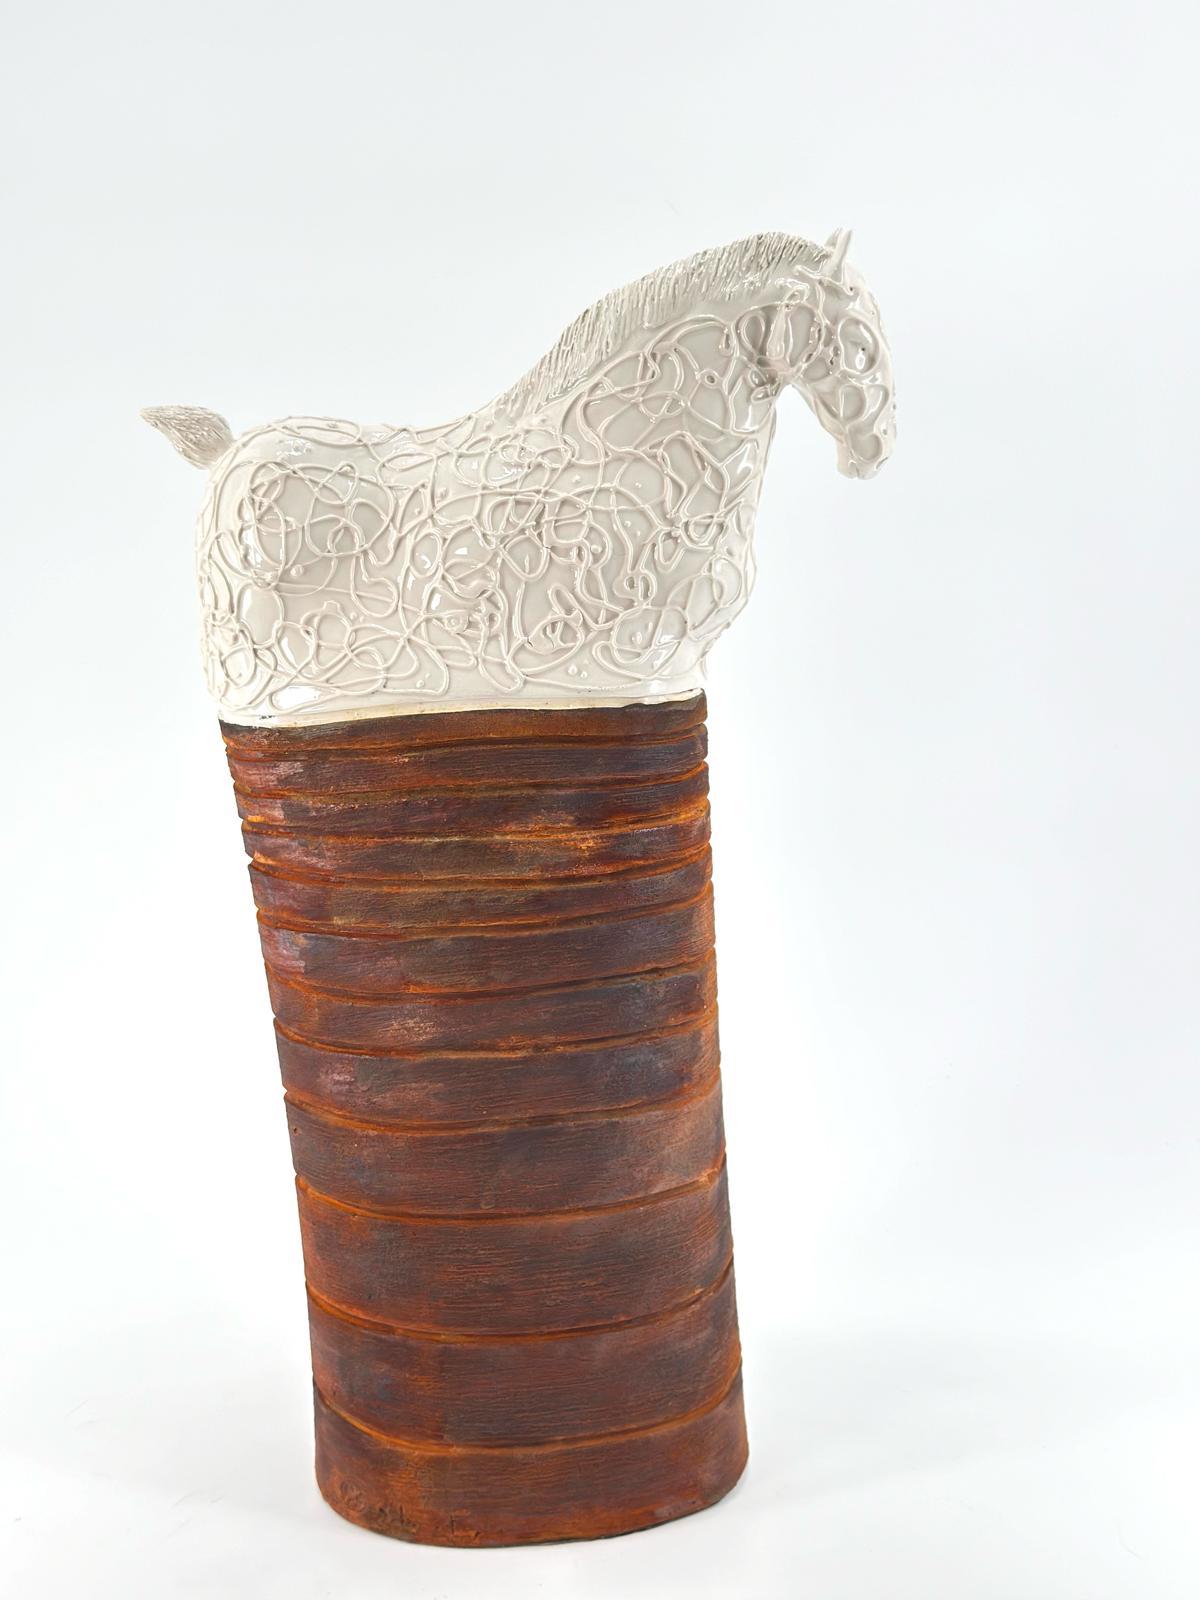 The piece is a unique representation of an Horse in a modern way. The animal is gently handcrafted starting from clay and all hand worked. All the pieces from Mosche Bianche are unique since they are done without any mold. Have yourself a unique